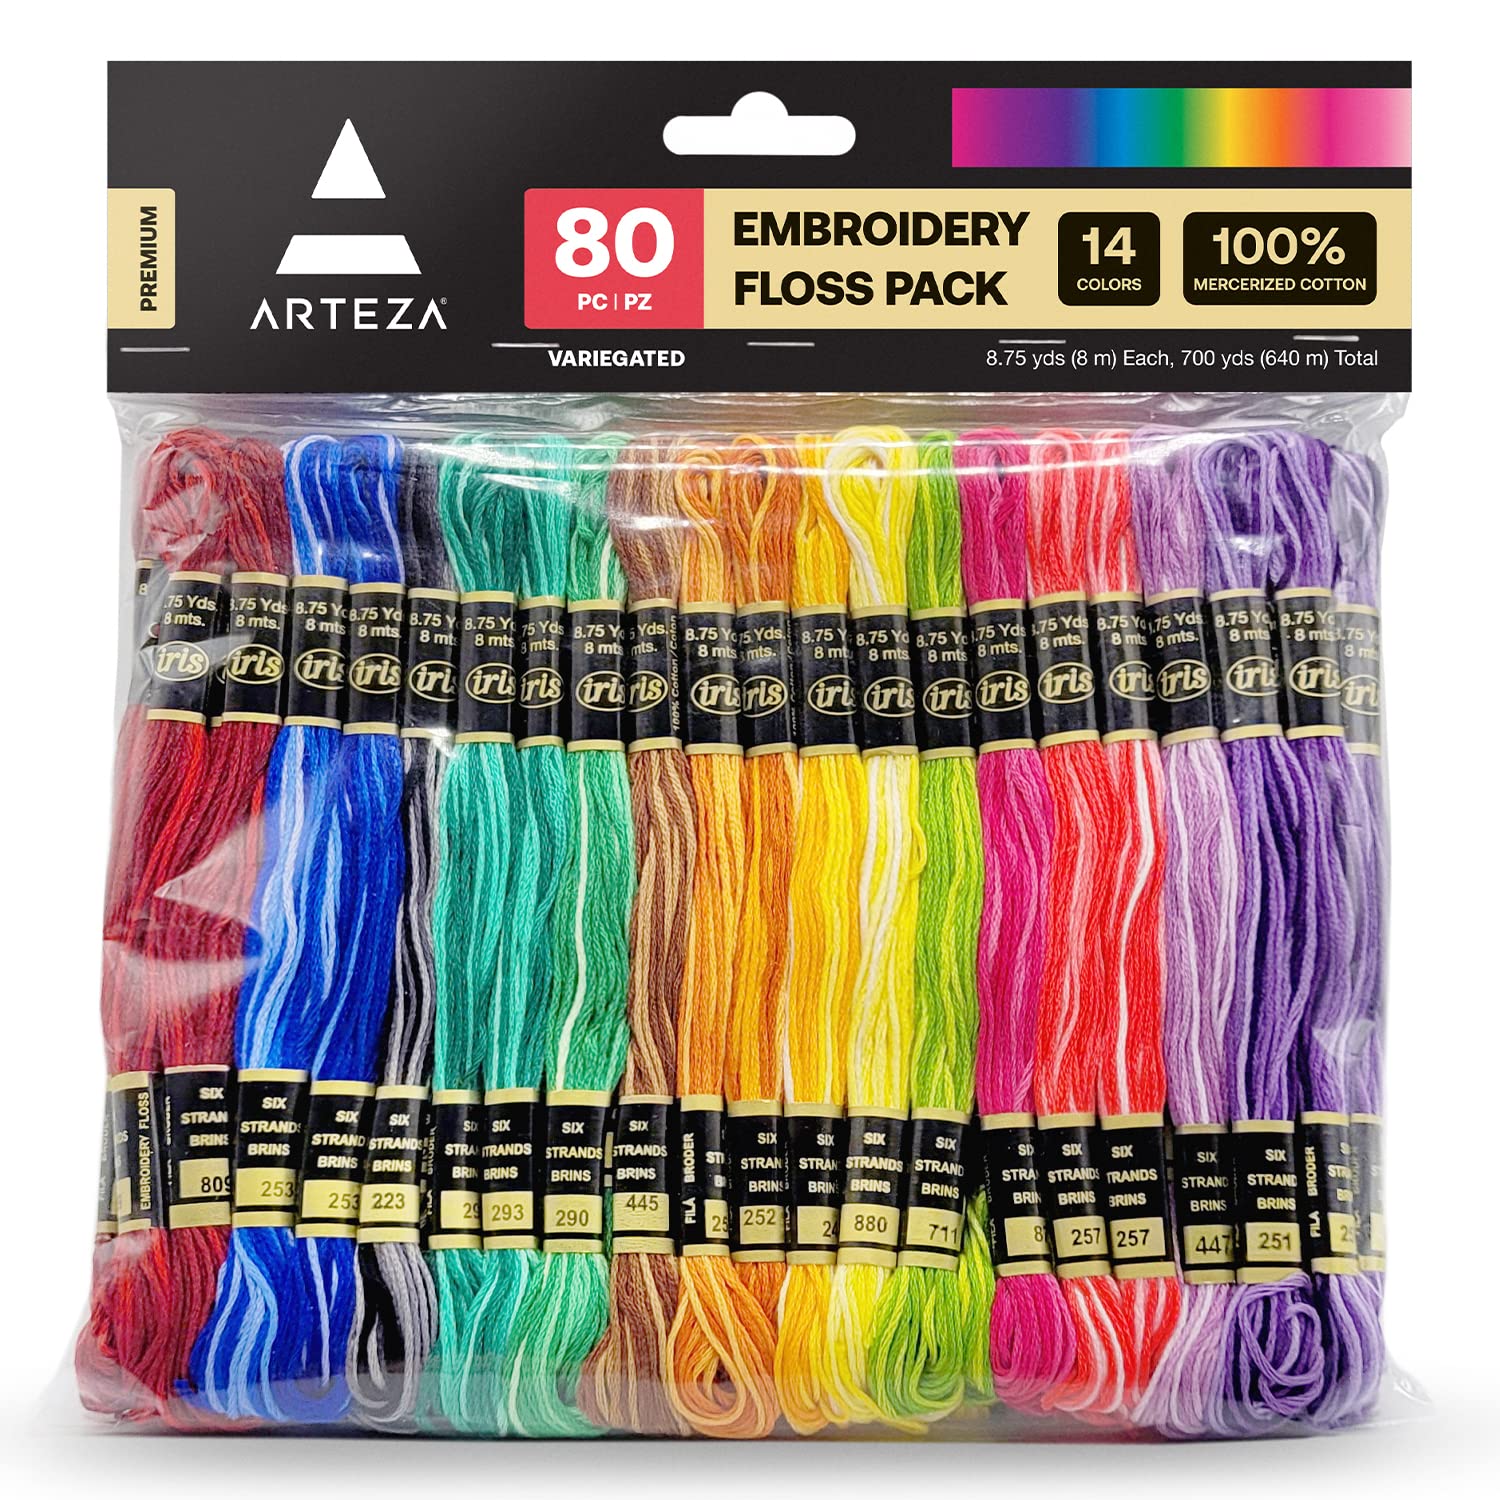 Arteza Embroidery Thread Pack – 80 Skeins of Embroidery Floss in 14 Variegated Colors – 100% Mercerized Cotton Friendship Bracelet String – Cross Stitch Supplies, 700 Yards per Pack